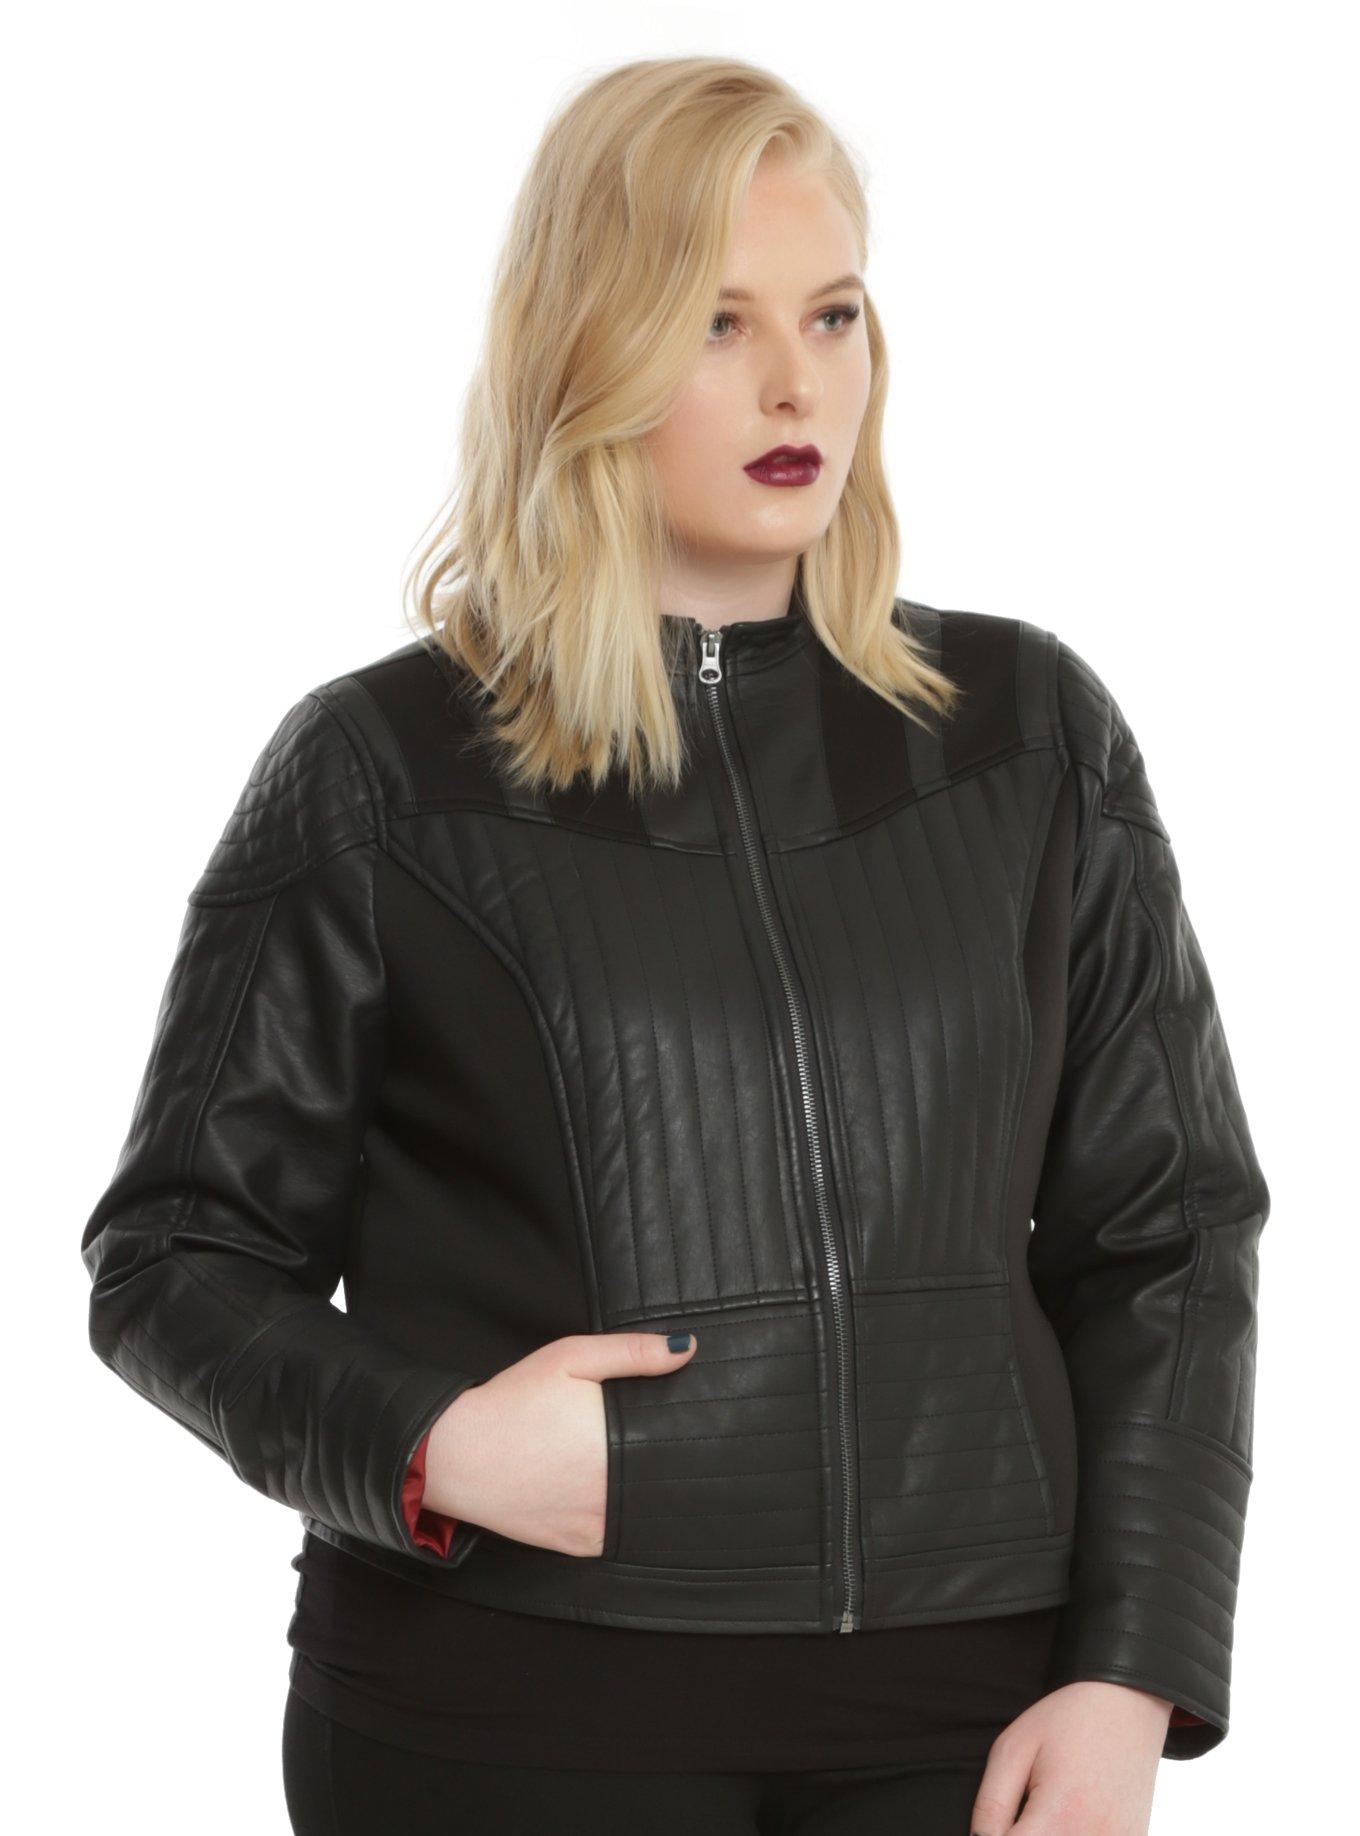 Her Universe Star Wars Darth Vader Girls Faux Leather Jacket Plus Size ...